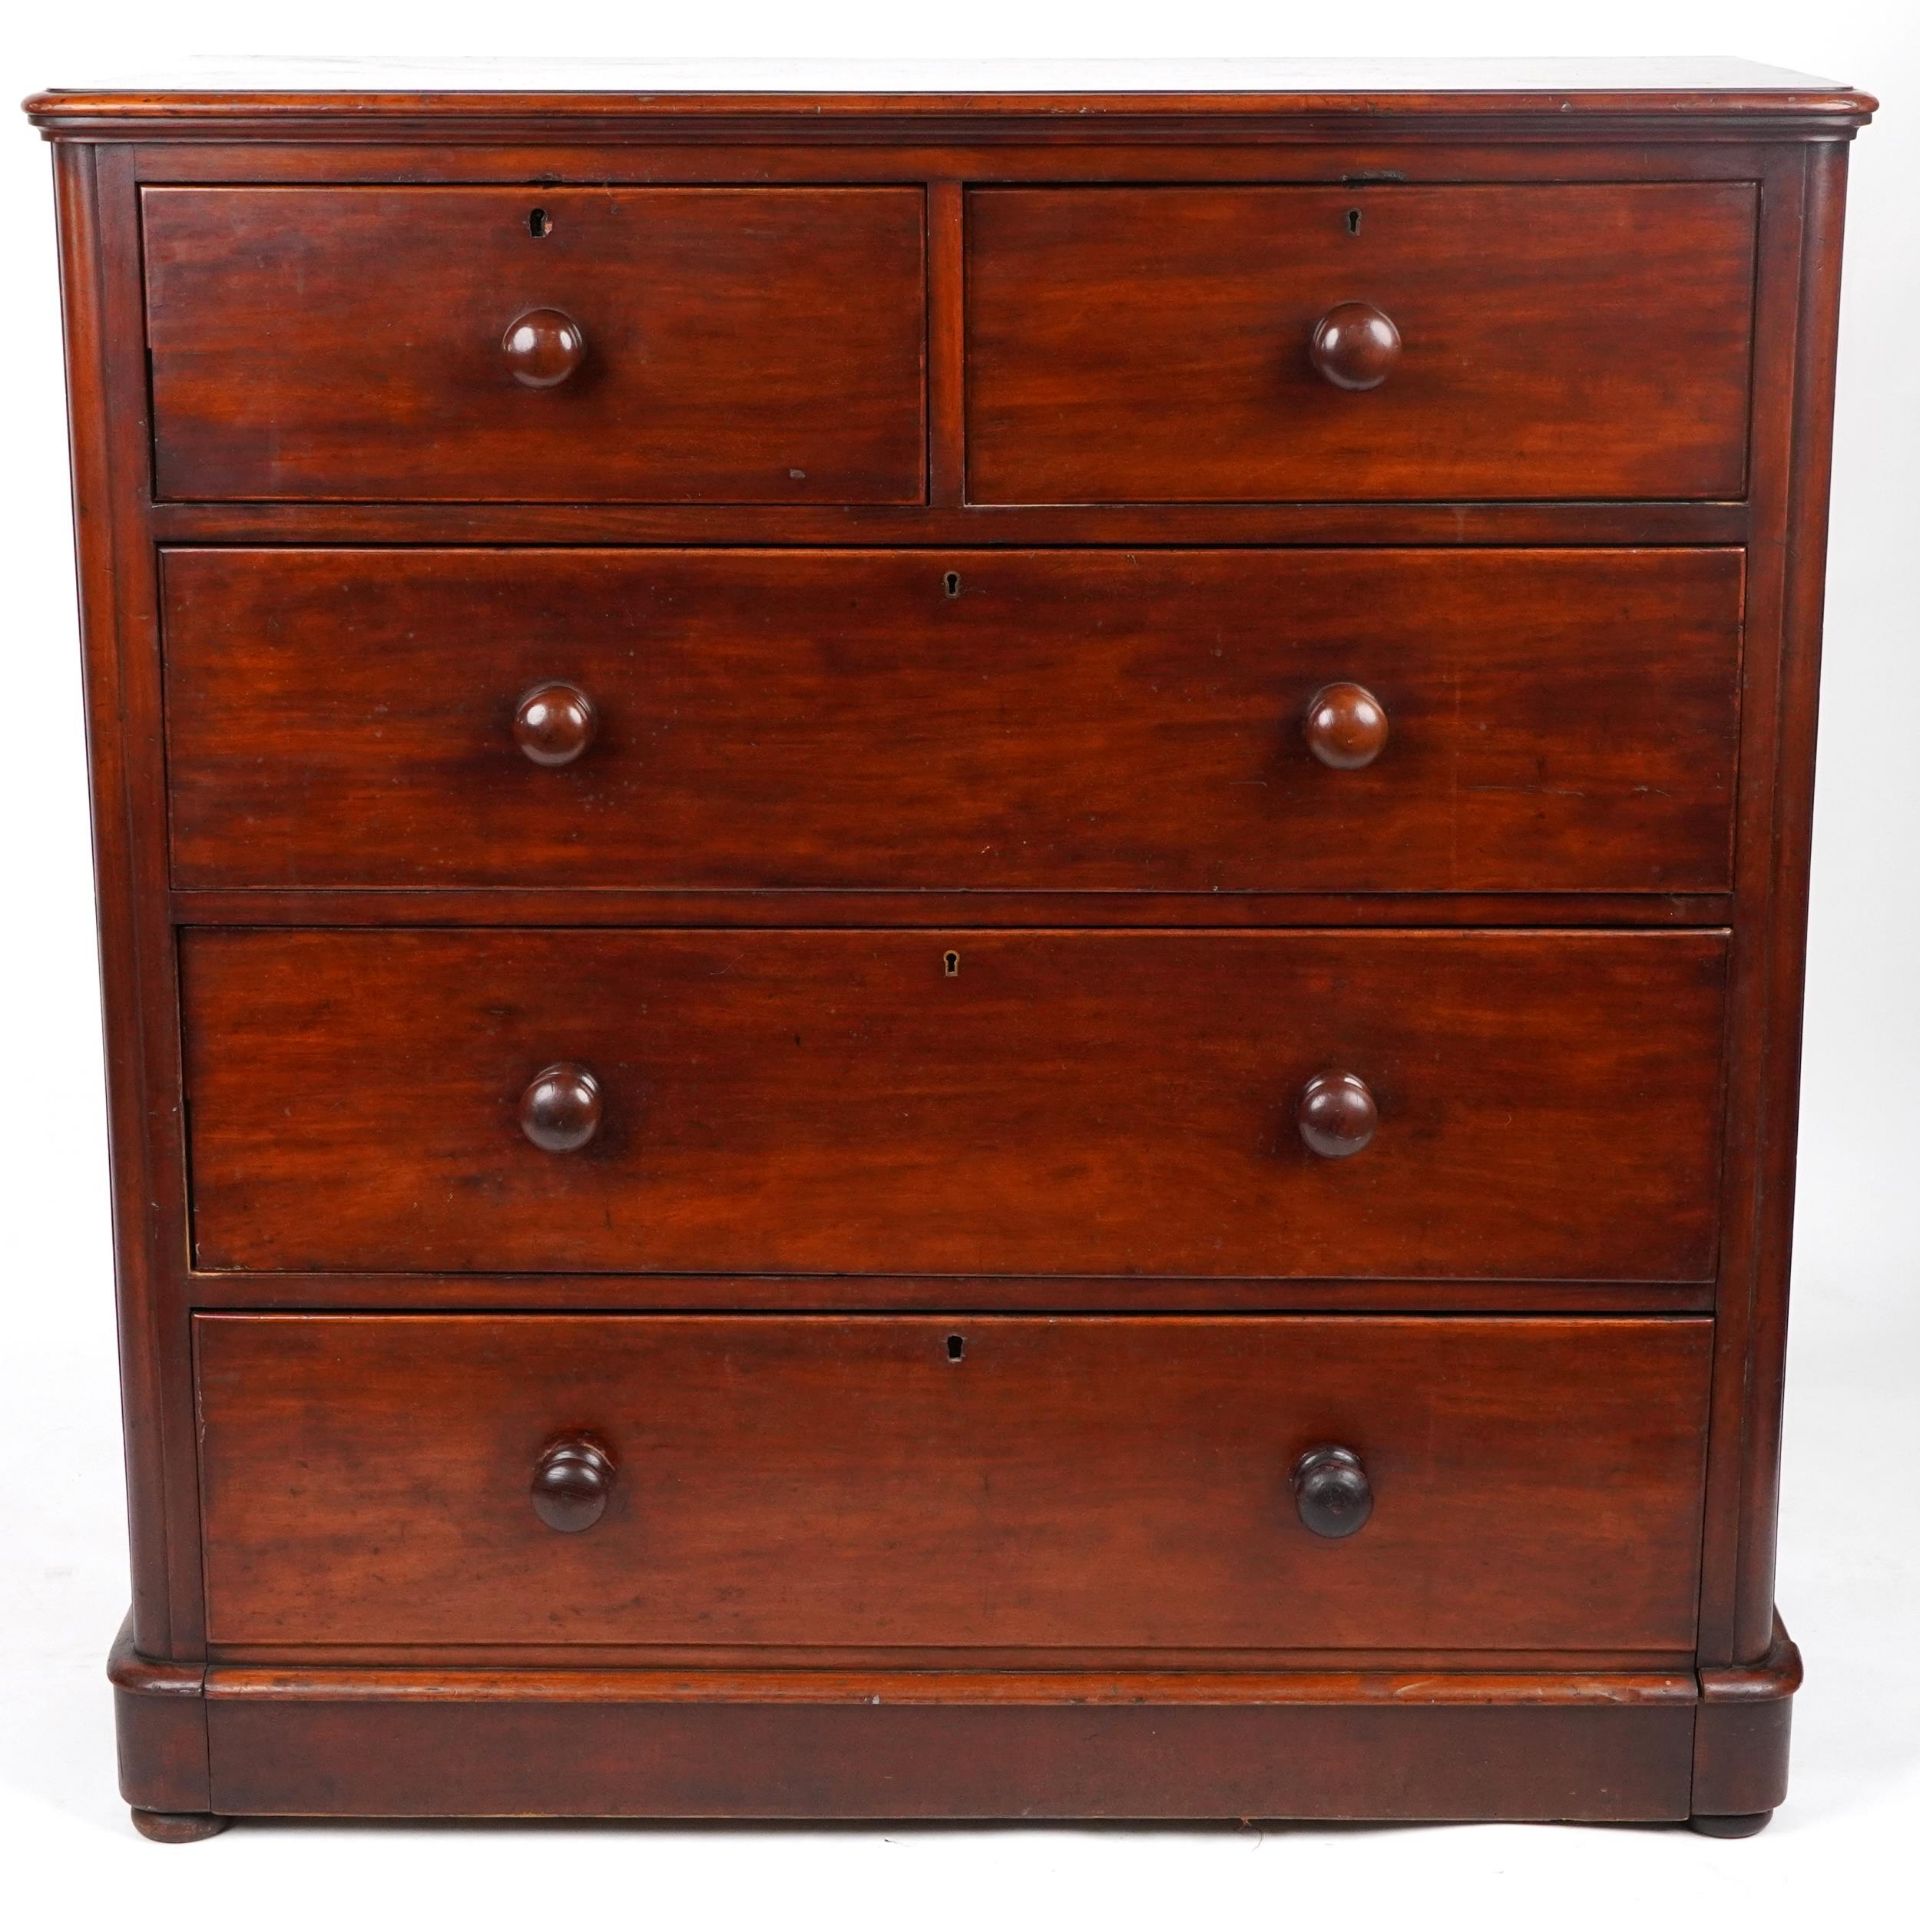 Victorian mahogany five drawer chest, 119cm H x 117.5cm W x 52cm D : For further information on this - Image 2 of 4